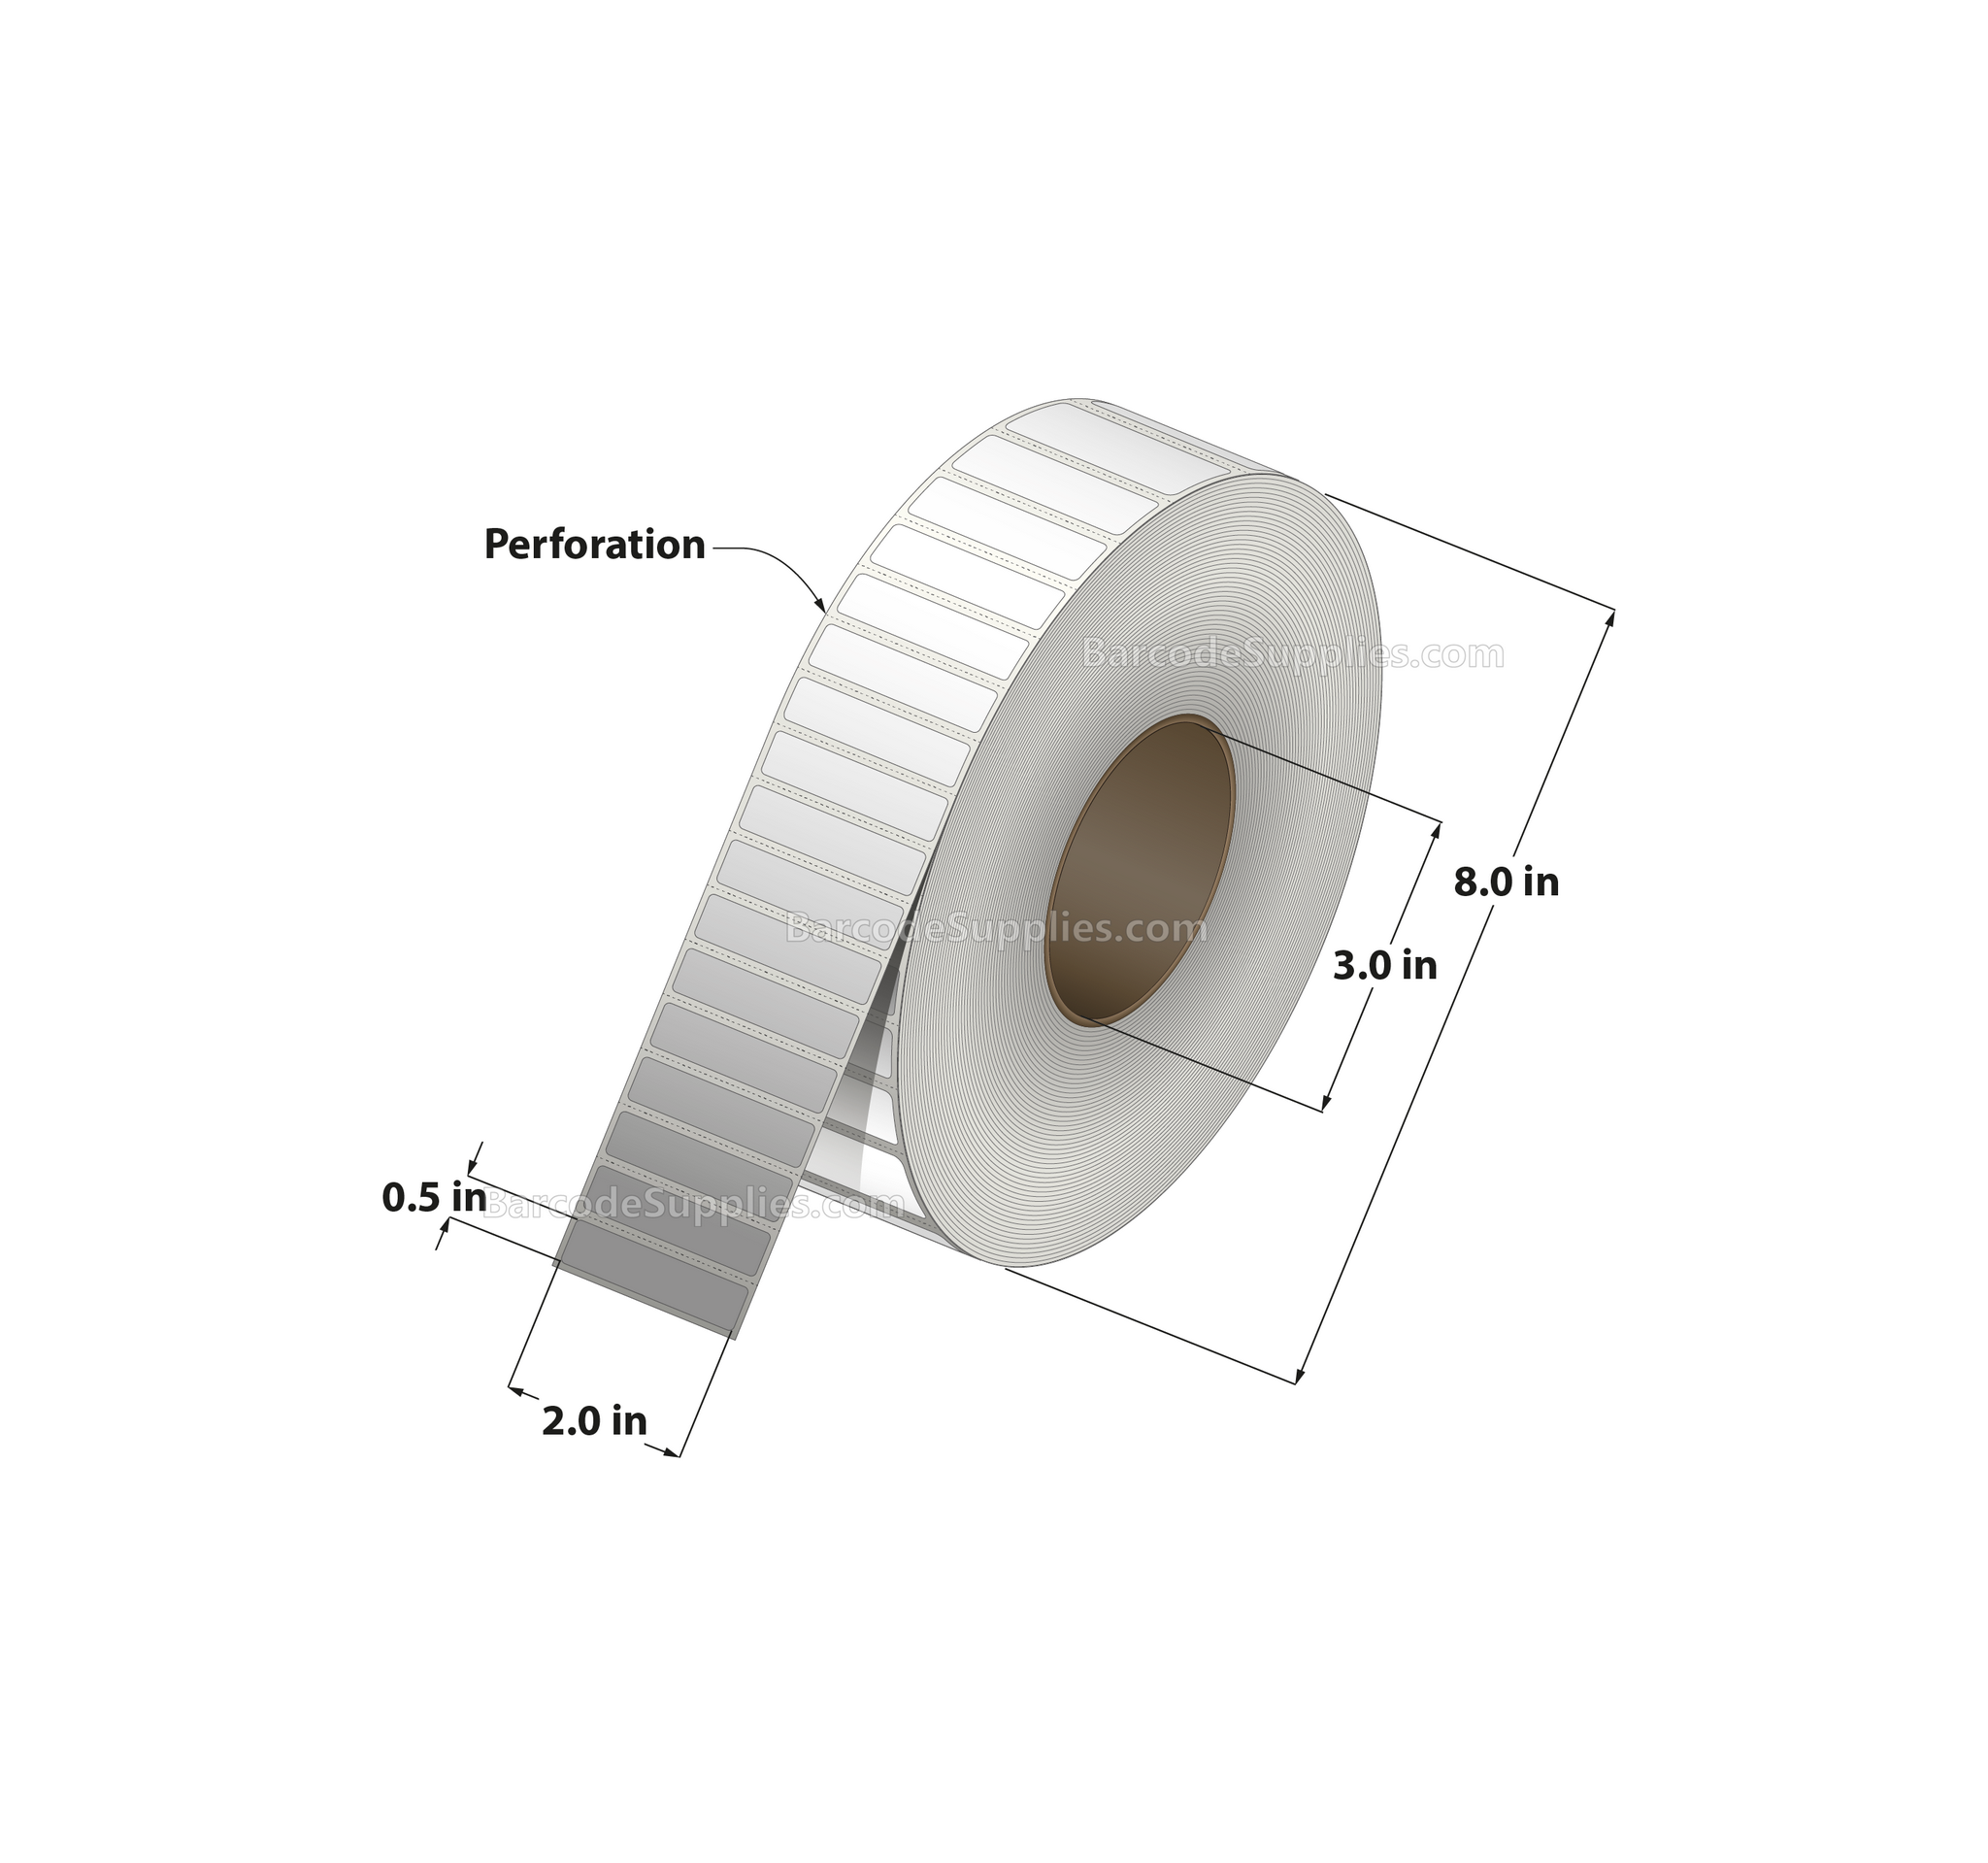 2 x 0.5 Thermal Transfer White Labels With Permanent Adhesive - Perforated - 9600 Labels Per Roll - Carton Of 8 Rolls - 76800 Labels Total - MPN: RT-2-05-9600-3